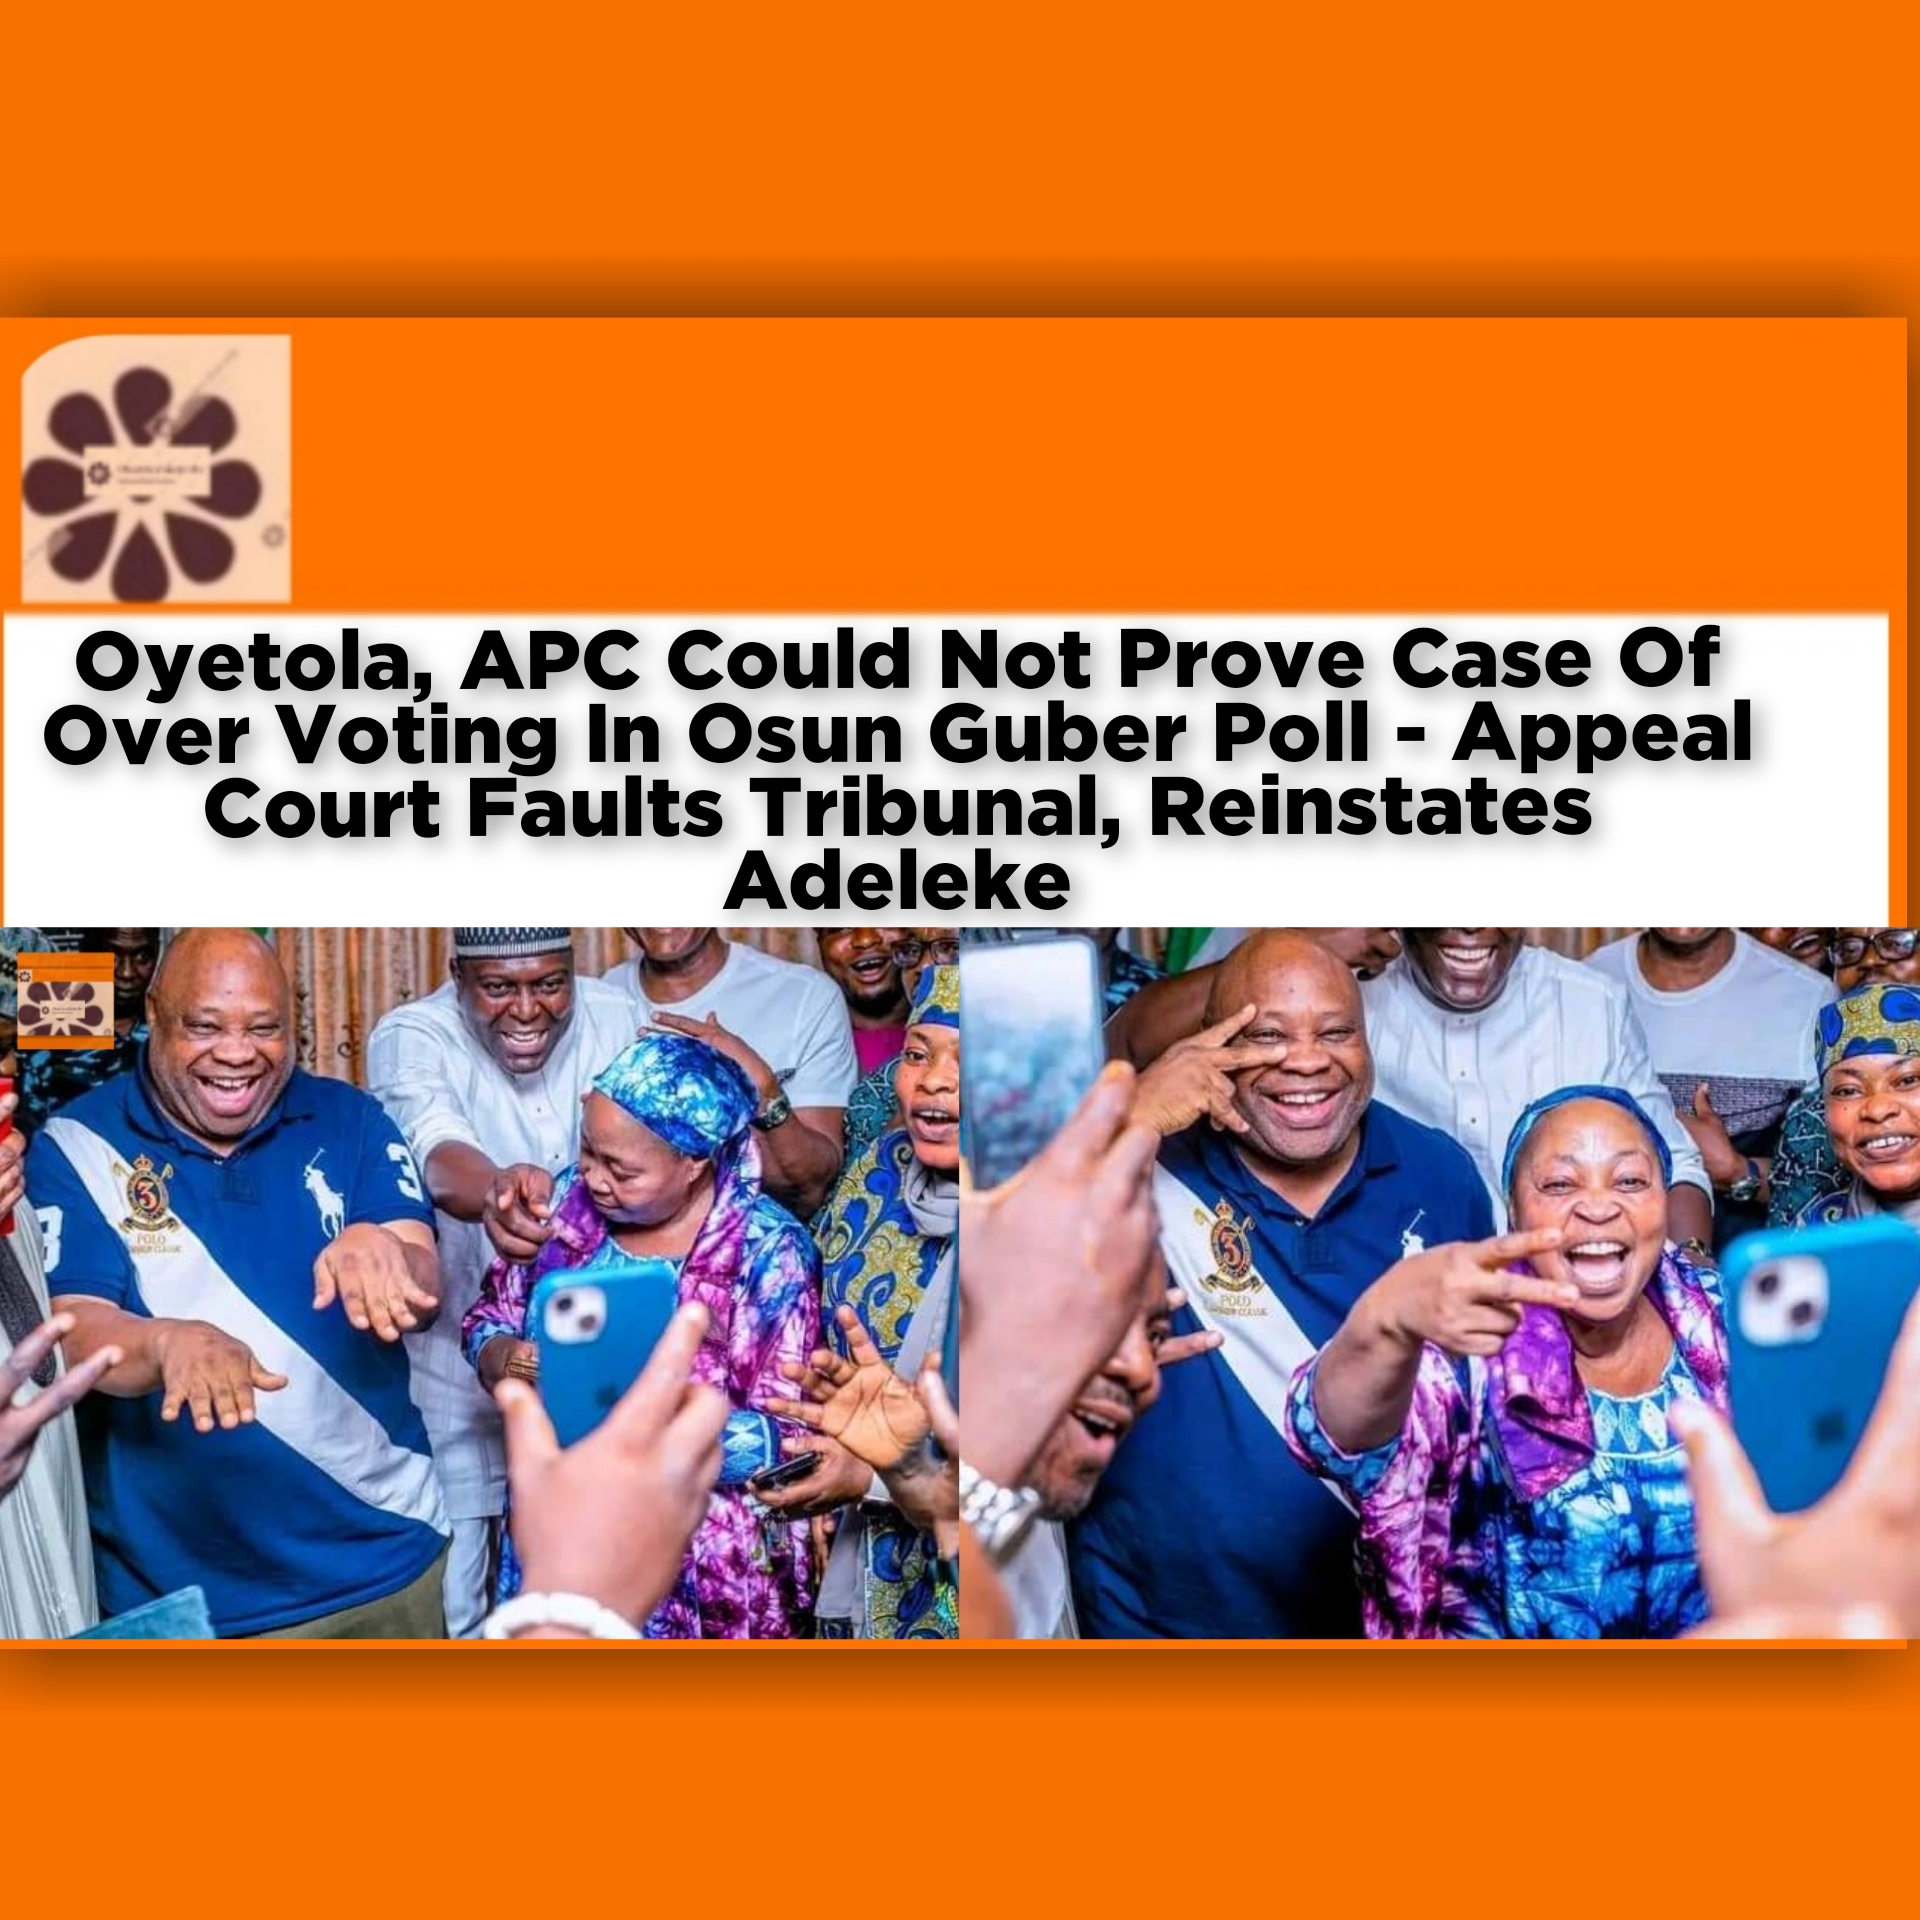 Oyetola, APC Could Not Prove Case Of Over Voting In Osun Guber Poll - Appeal Court Faults Tribunal, Reinstates Adeleke ~ OsazuwaAkonedo #ESN